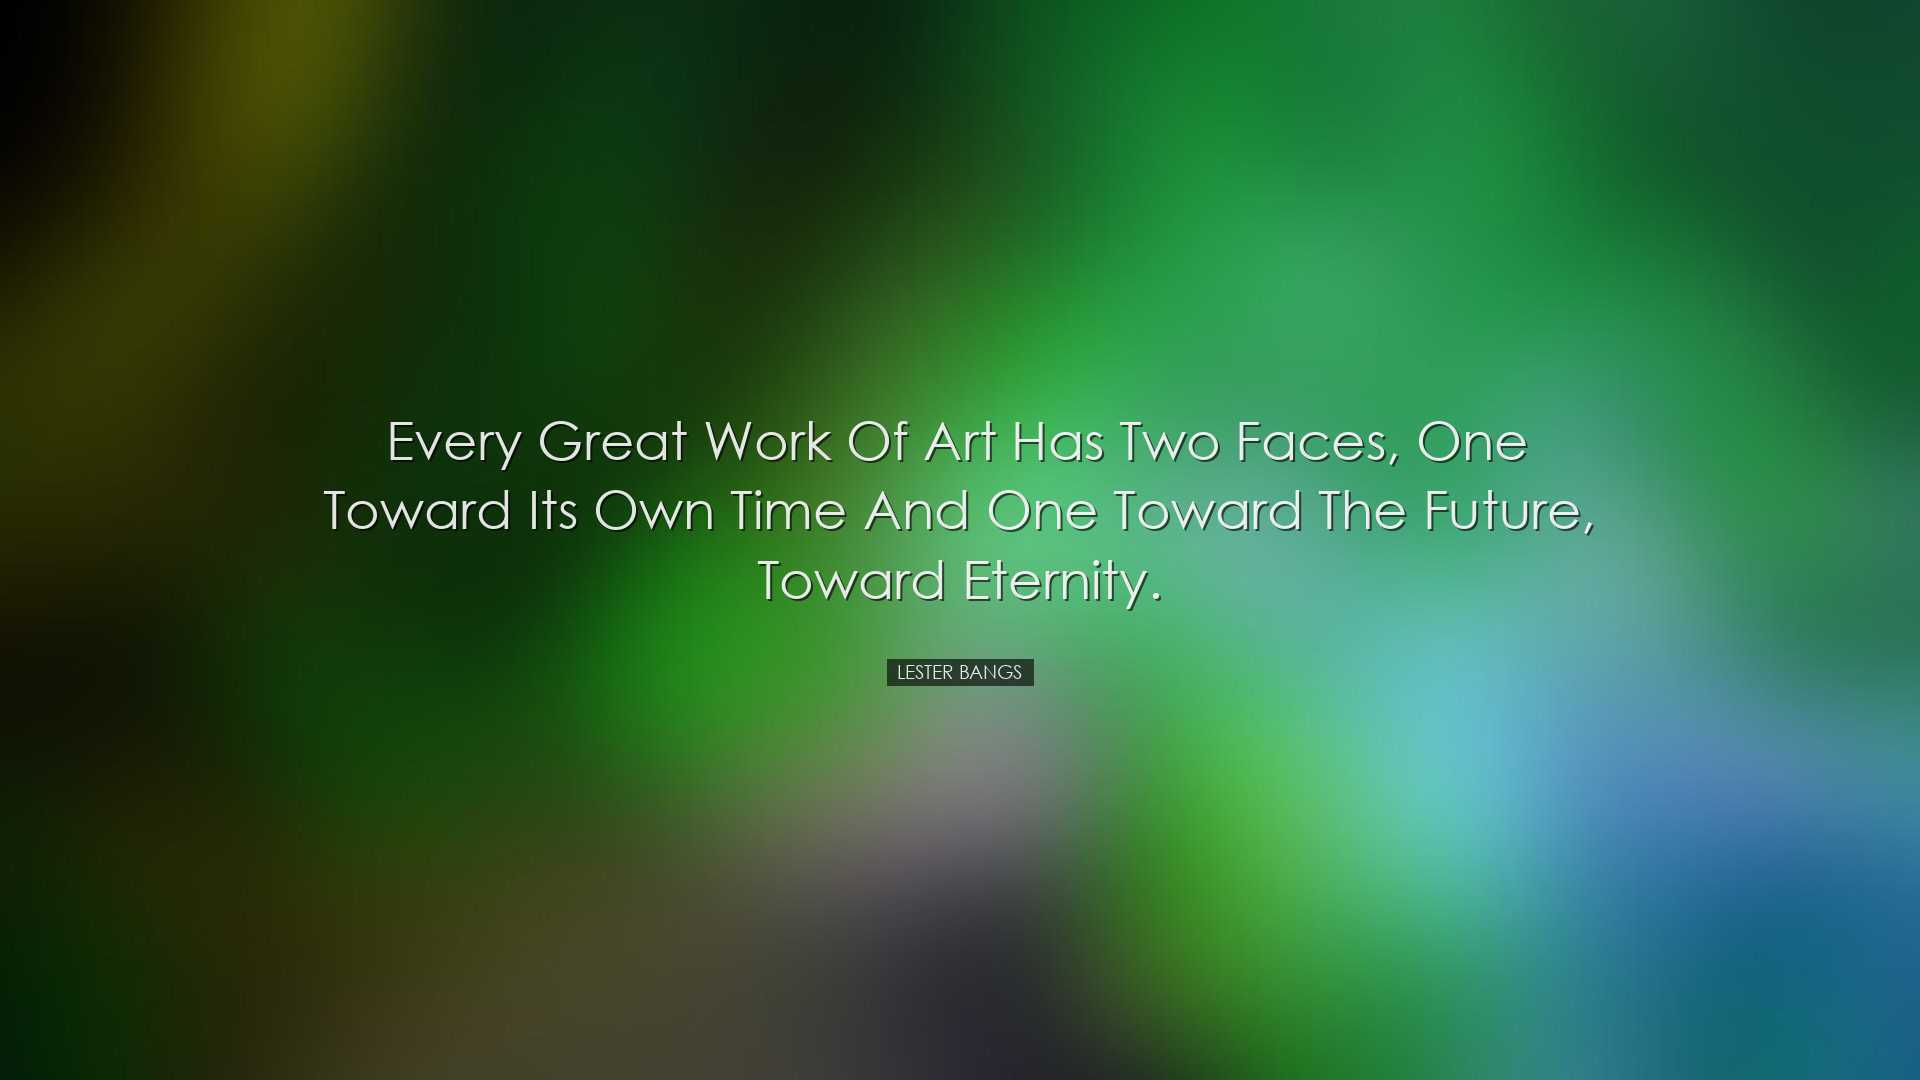 Every great work of art has two faces, one toward its own time and